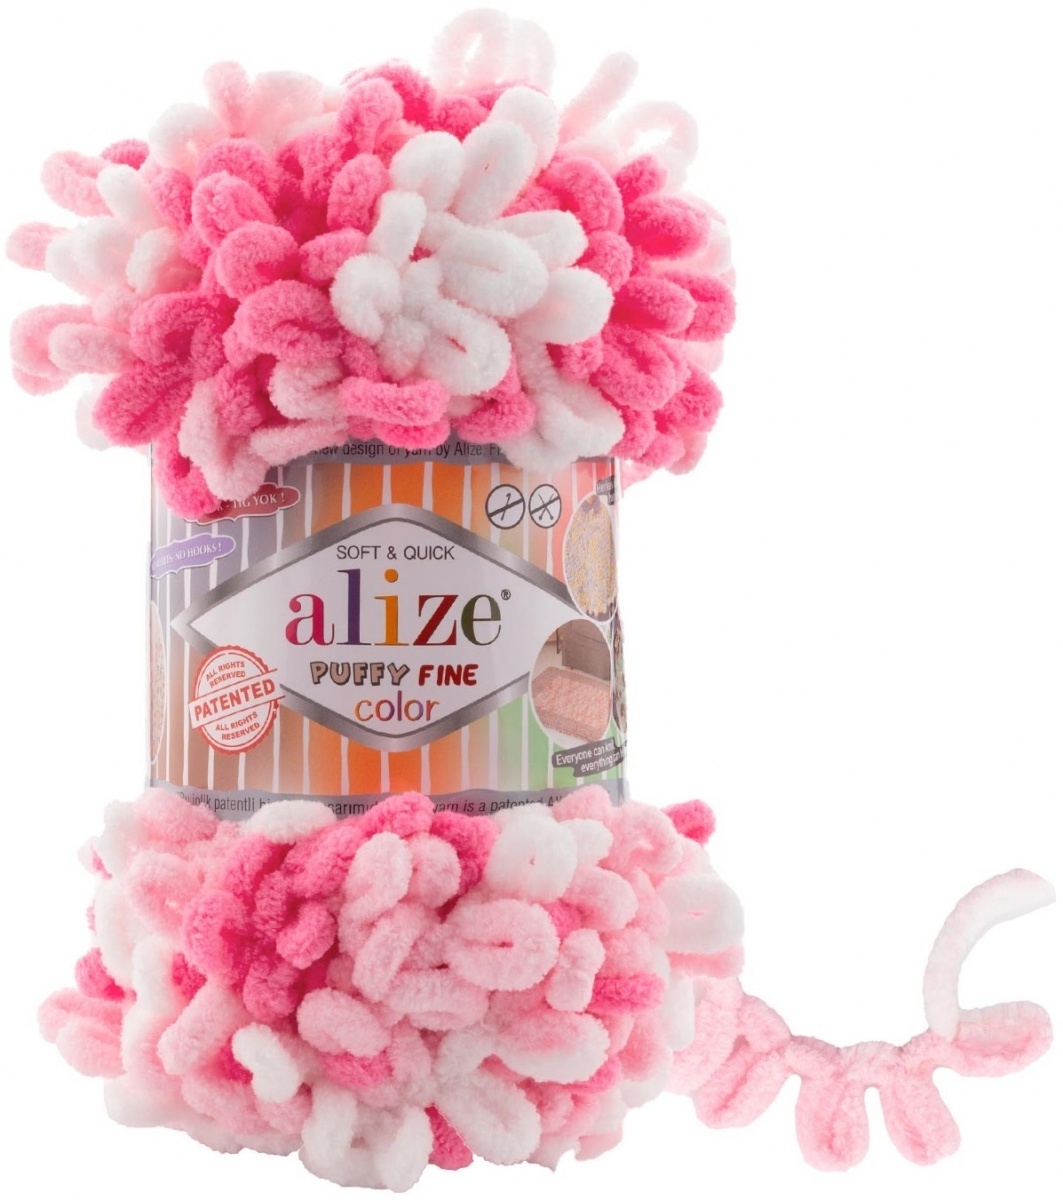 Alize Puffy Fine Color, 100% Micropolyester 5 Skein Value Pack, 500g фото 25